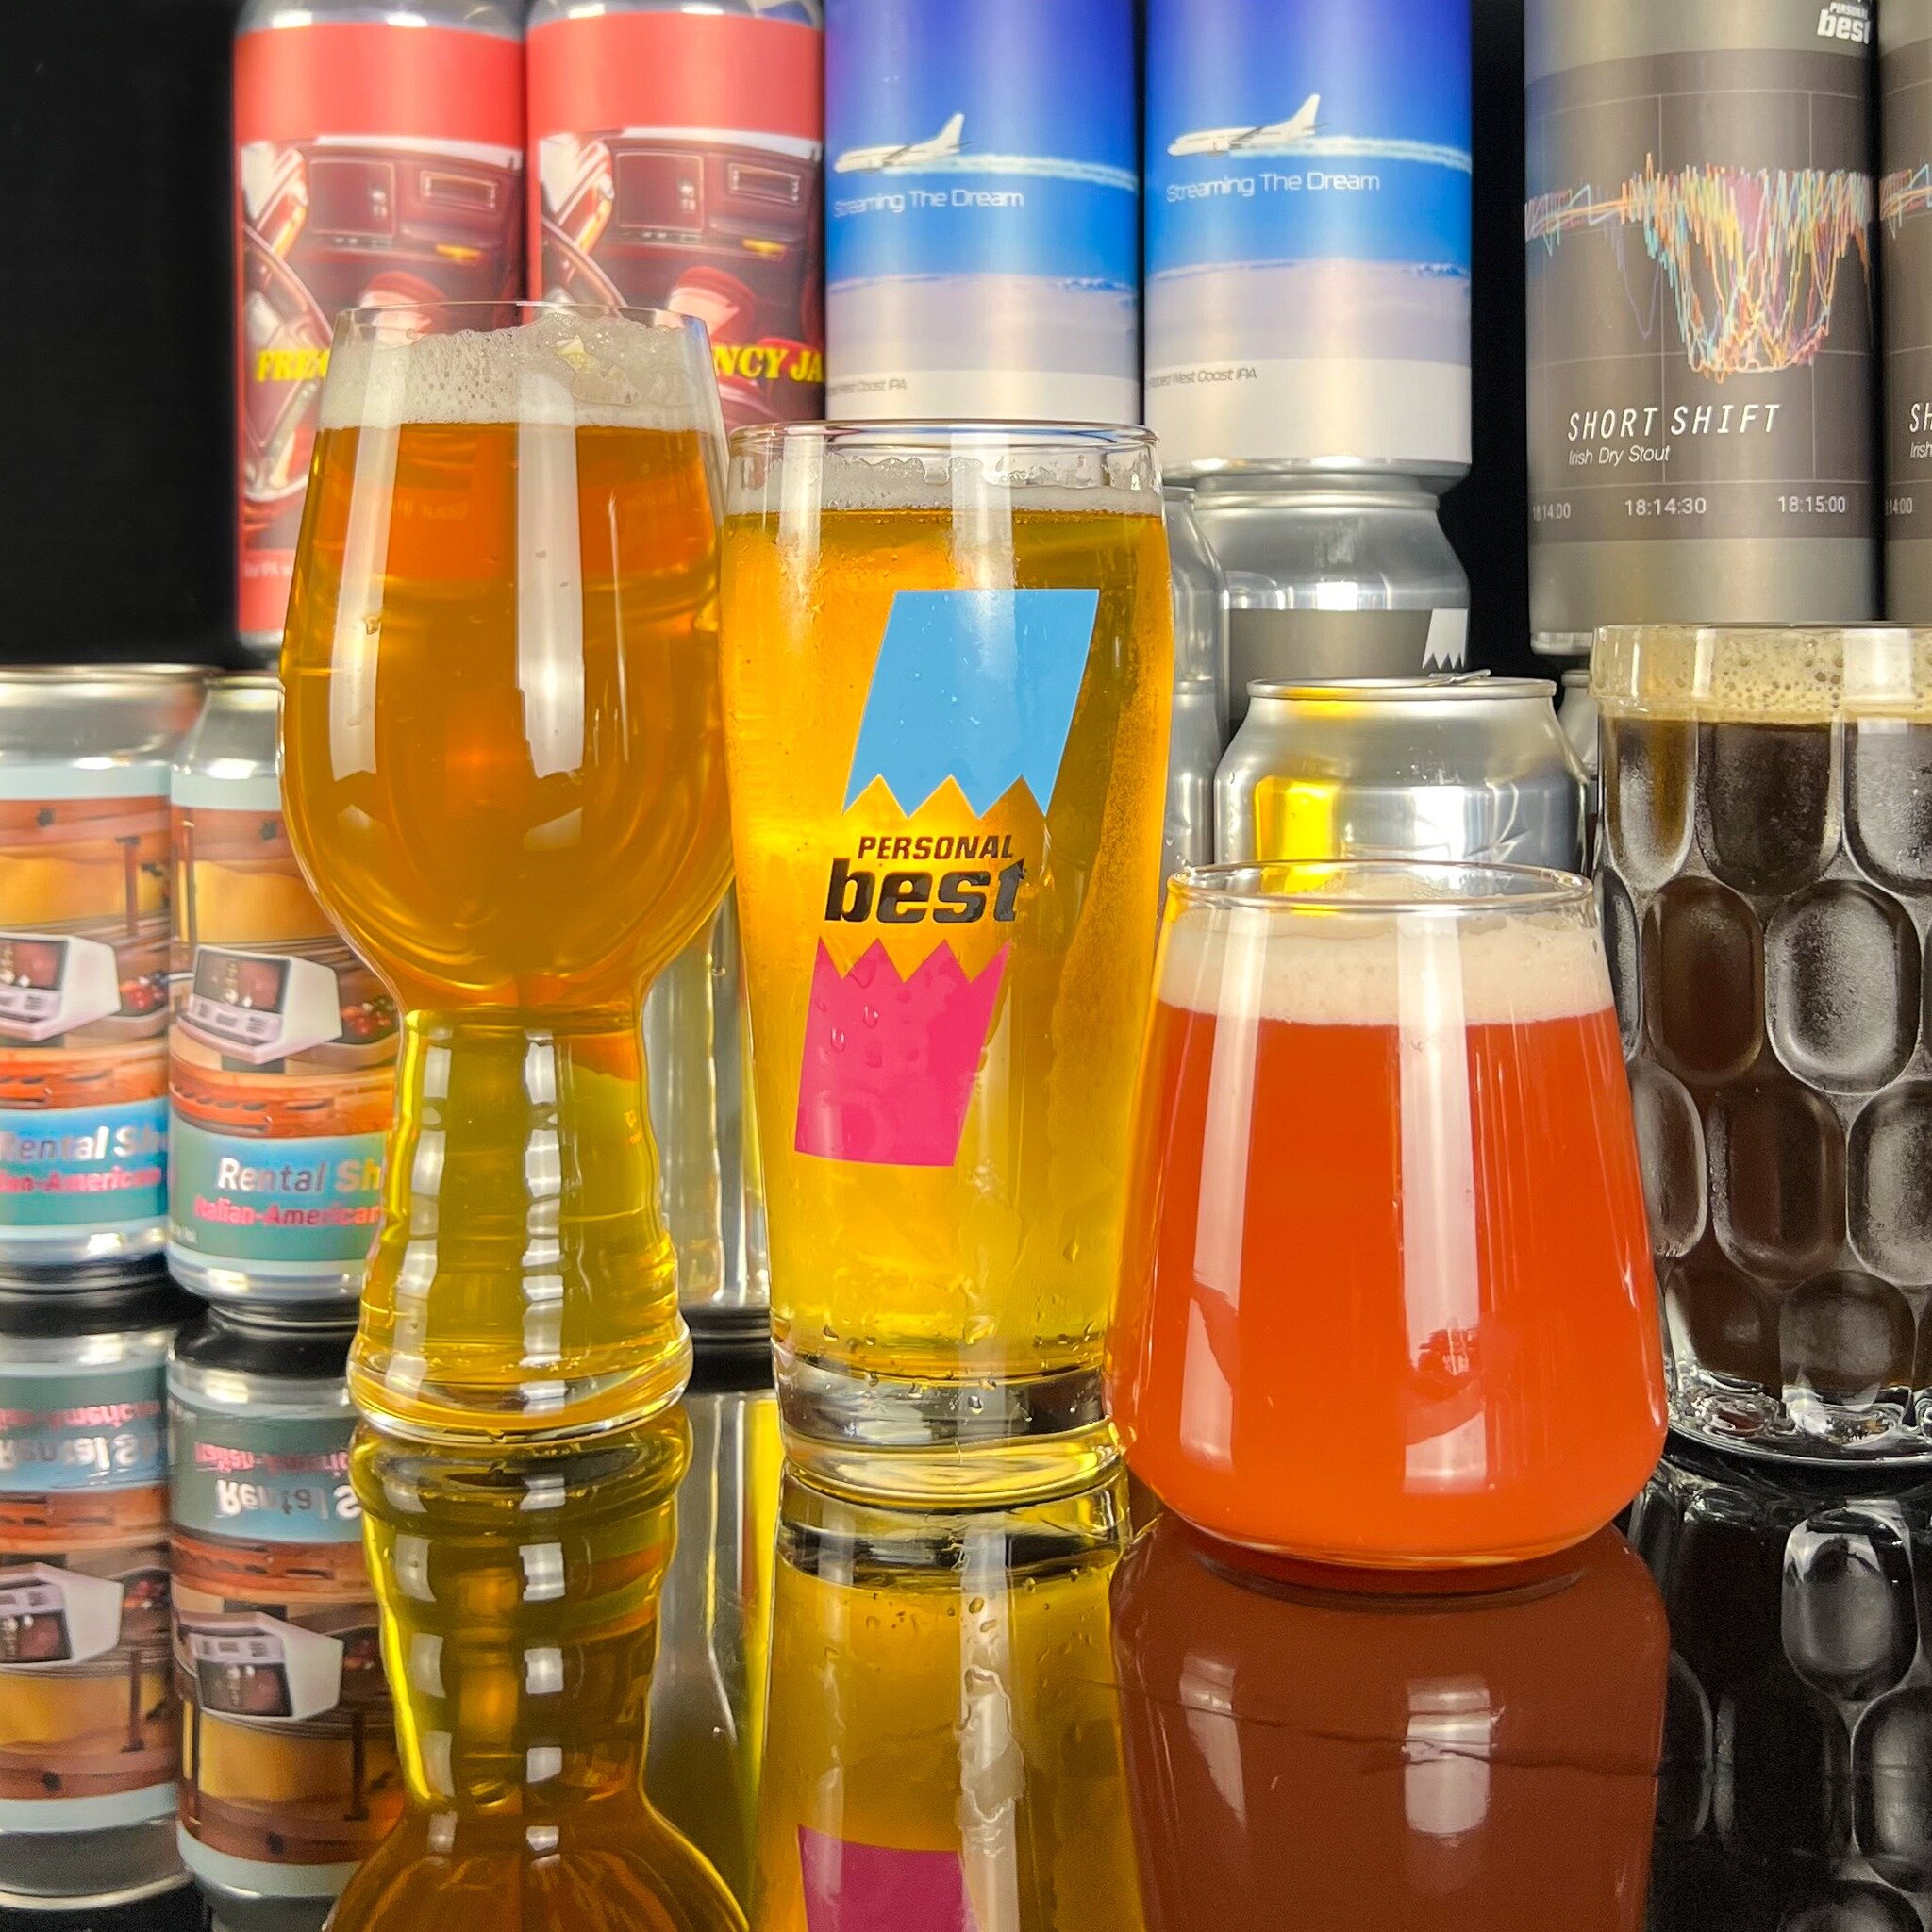 CANS! Three returning faves and introducing: STREAMING THE DREAM.

- Streaming The Dream - 7.3%
A true West-Coast IPA: pale, clear as day, dry, and gently bitter. It packs a beautiful bouquet of bright hop flavor and an intoxicating aroma that brings